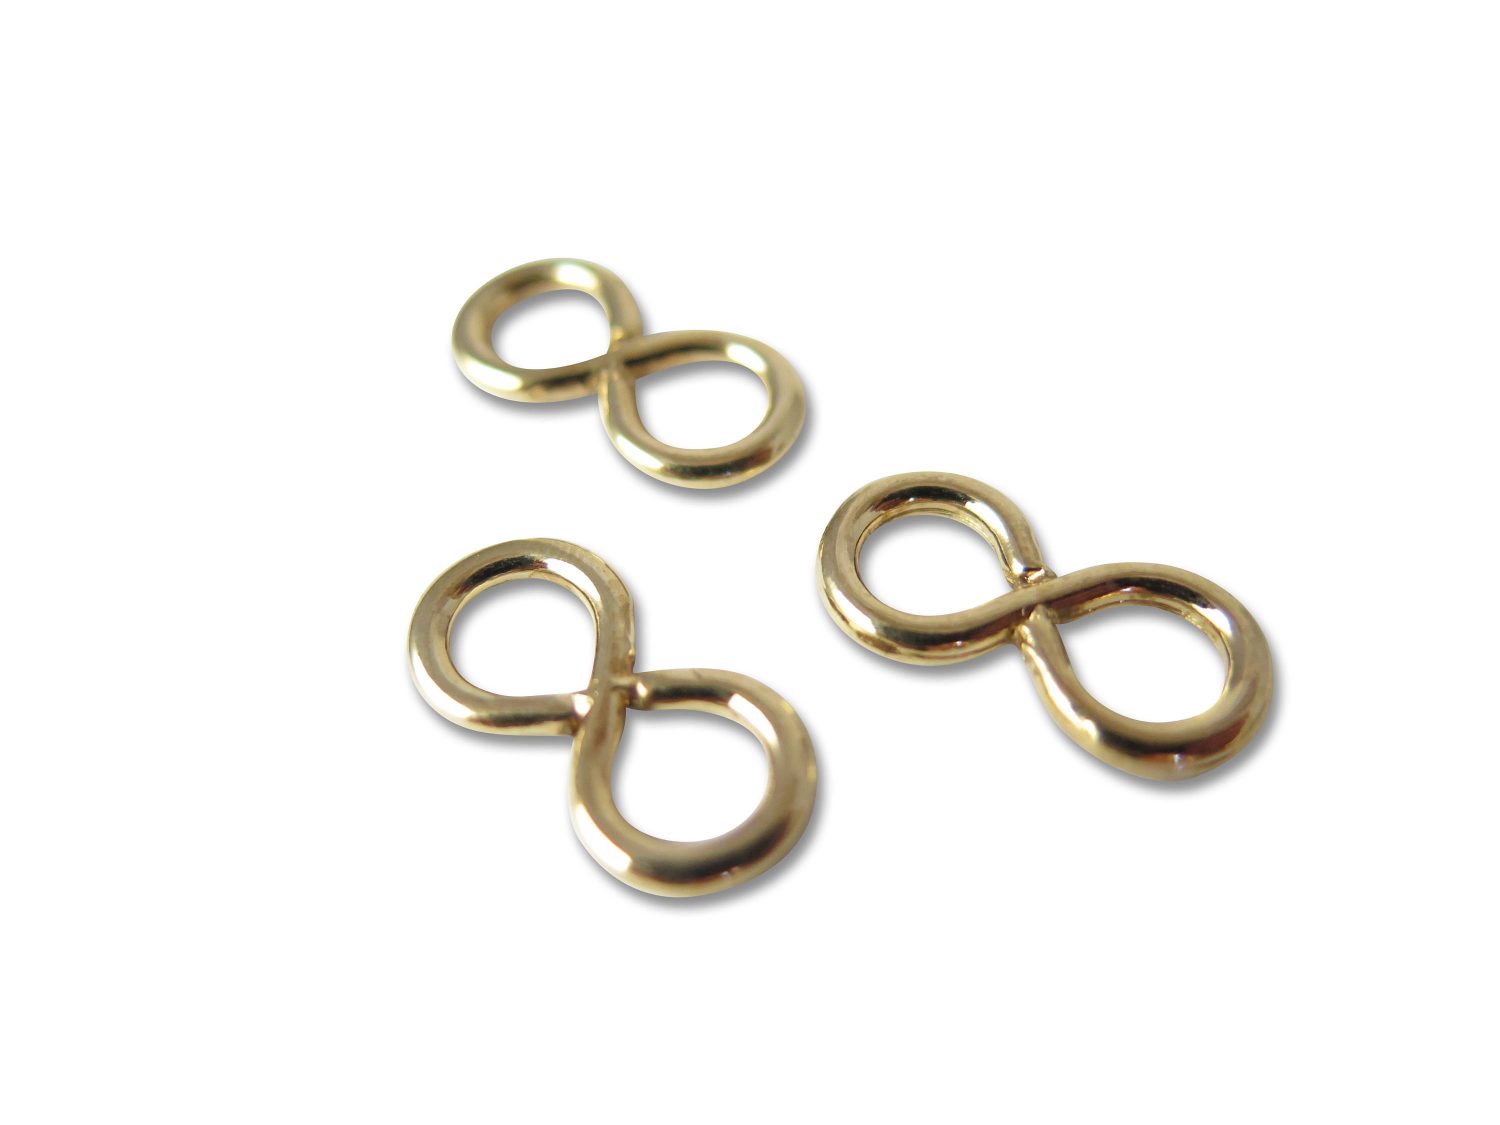 https://brooklyncharm.com/wp-content/uploads/2017/08/vintage-gold-plated-infinity-connector-charms-12x-v214-c-59e7d110.jpg